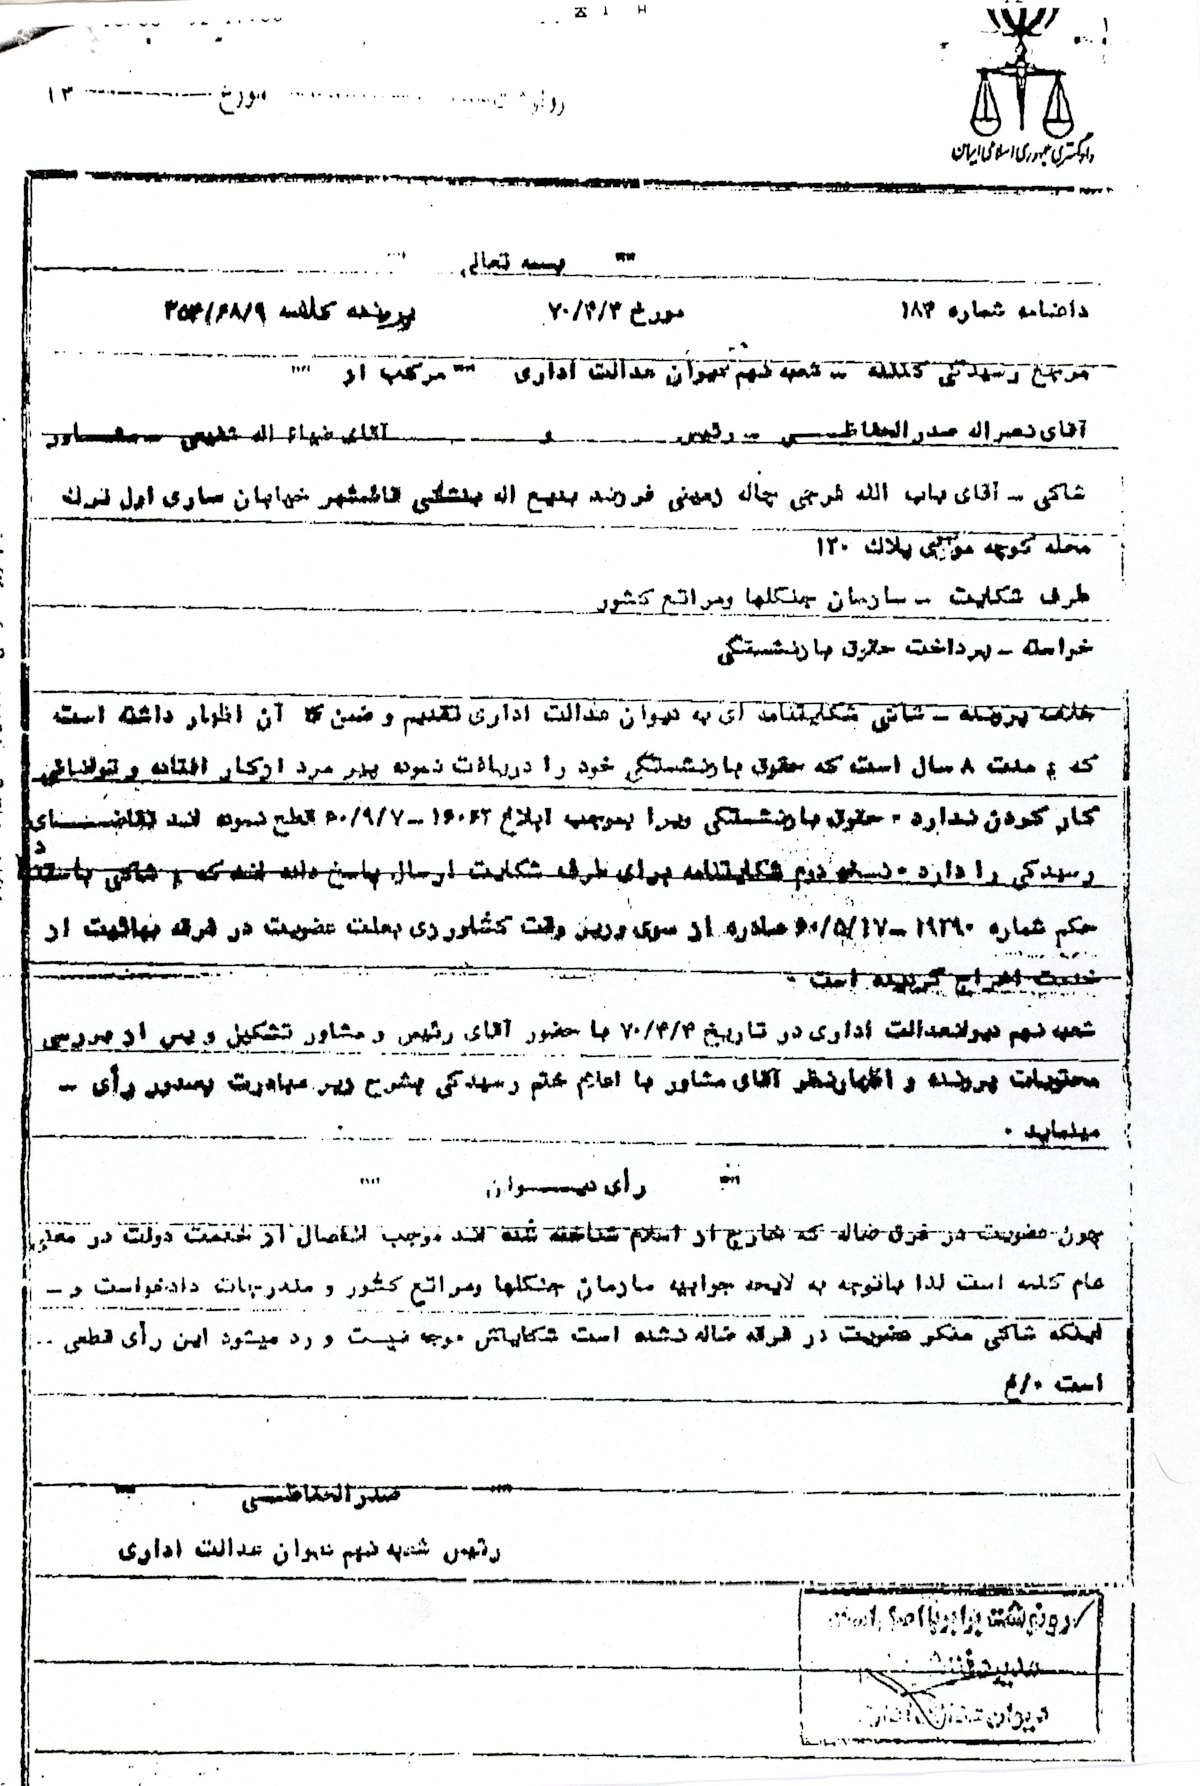 A letter from the Court of Administrative Justice to a person with disabilities informs him that he has been “dismissed from his job due to his membership in the Baha’i sect”, that his pension benefits have been stopped, and that his further complaints to the court are “deemed invalid and rejected.”